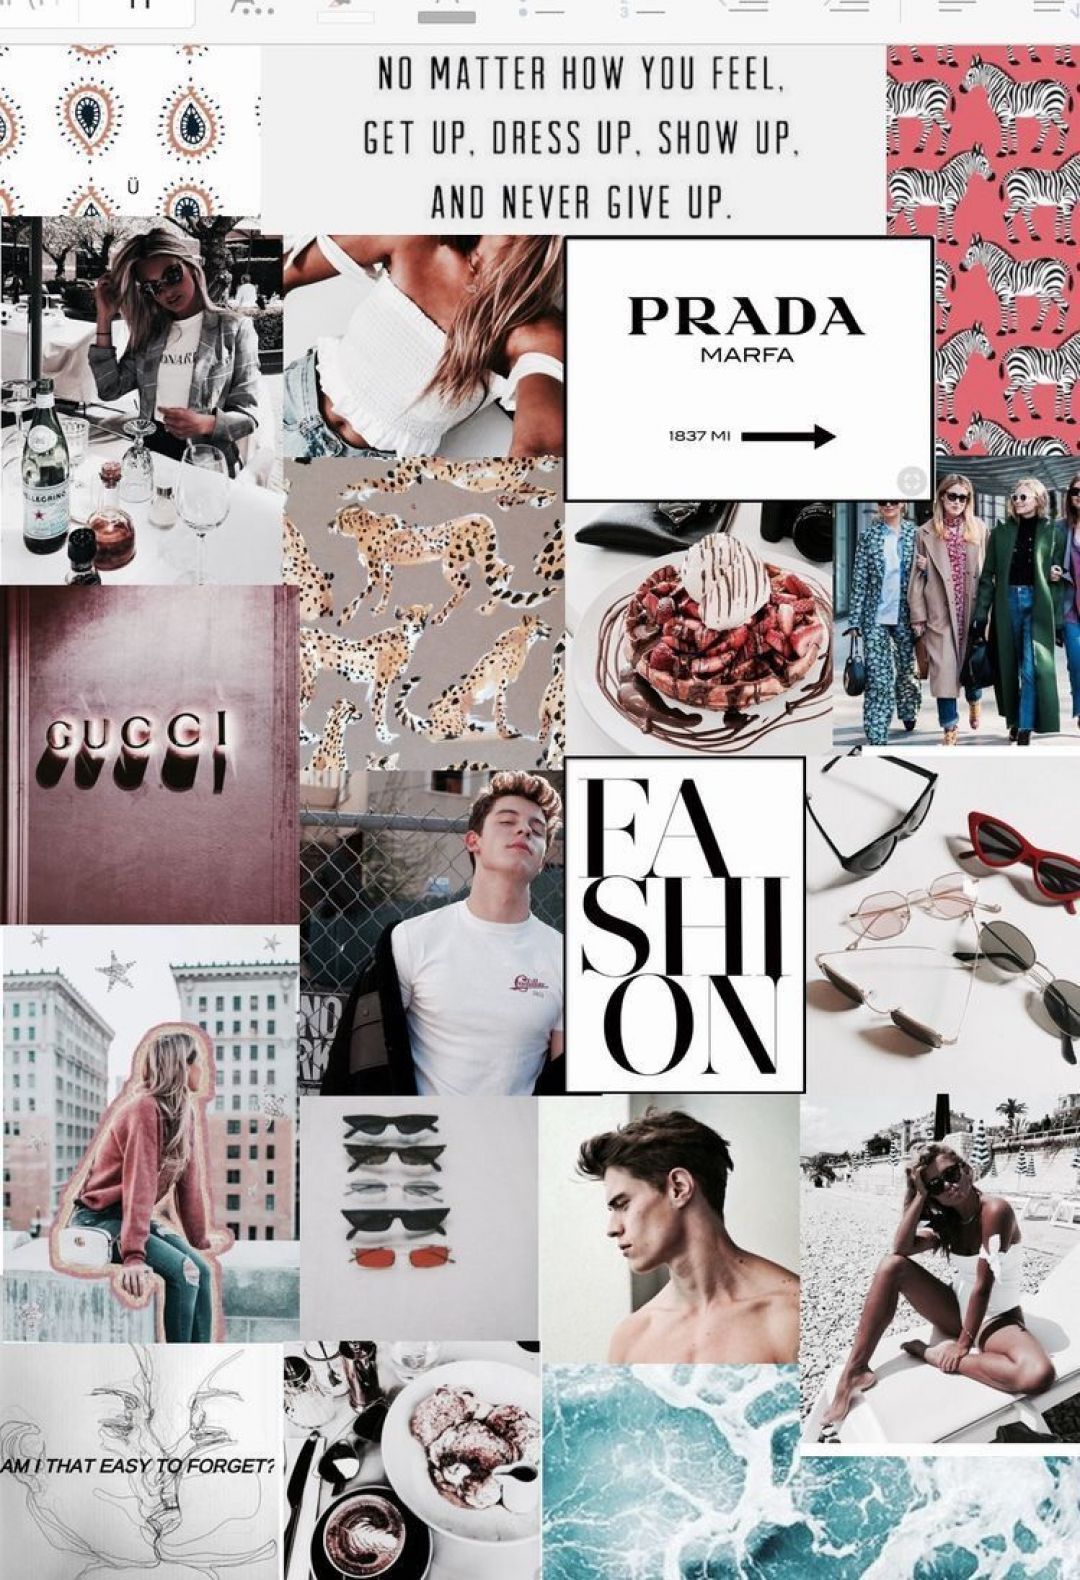 A collage of fashion and advertising images - Fashion